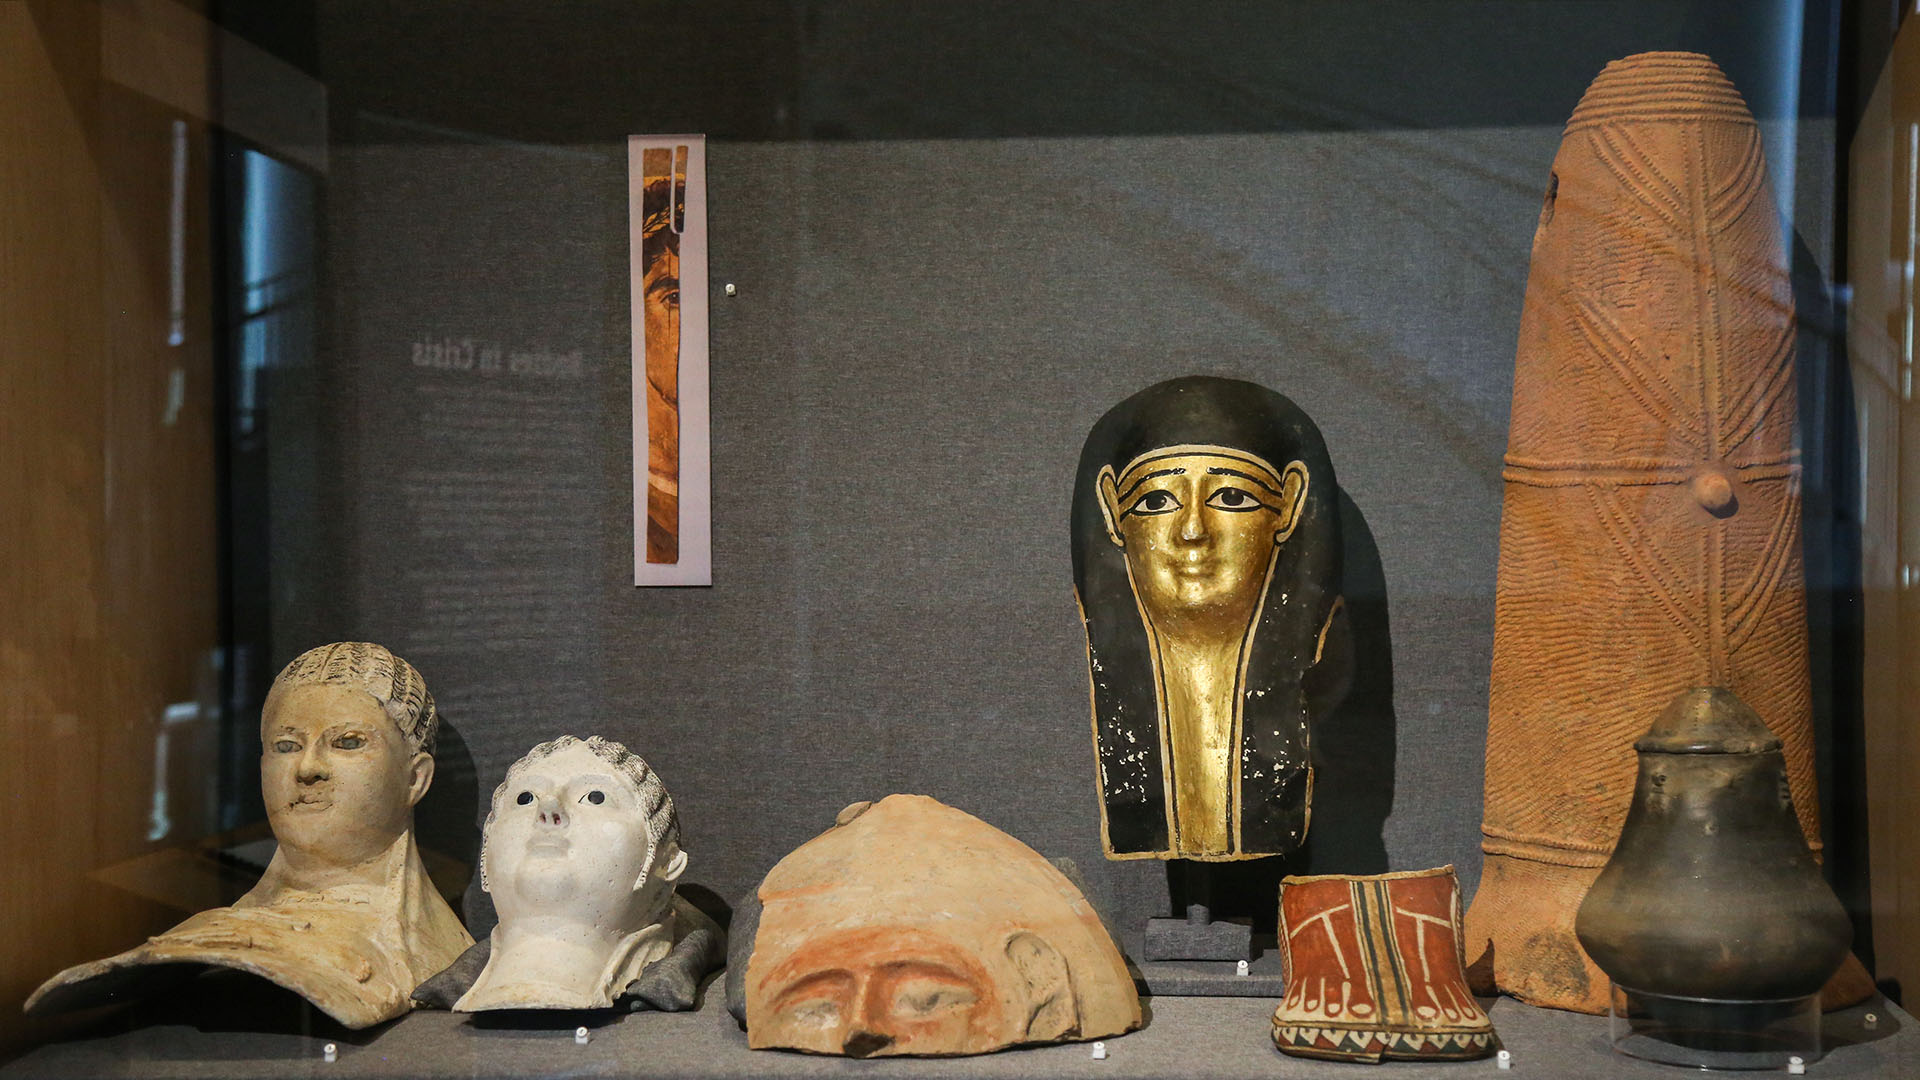 Case shot including multiple face casts and a vase